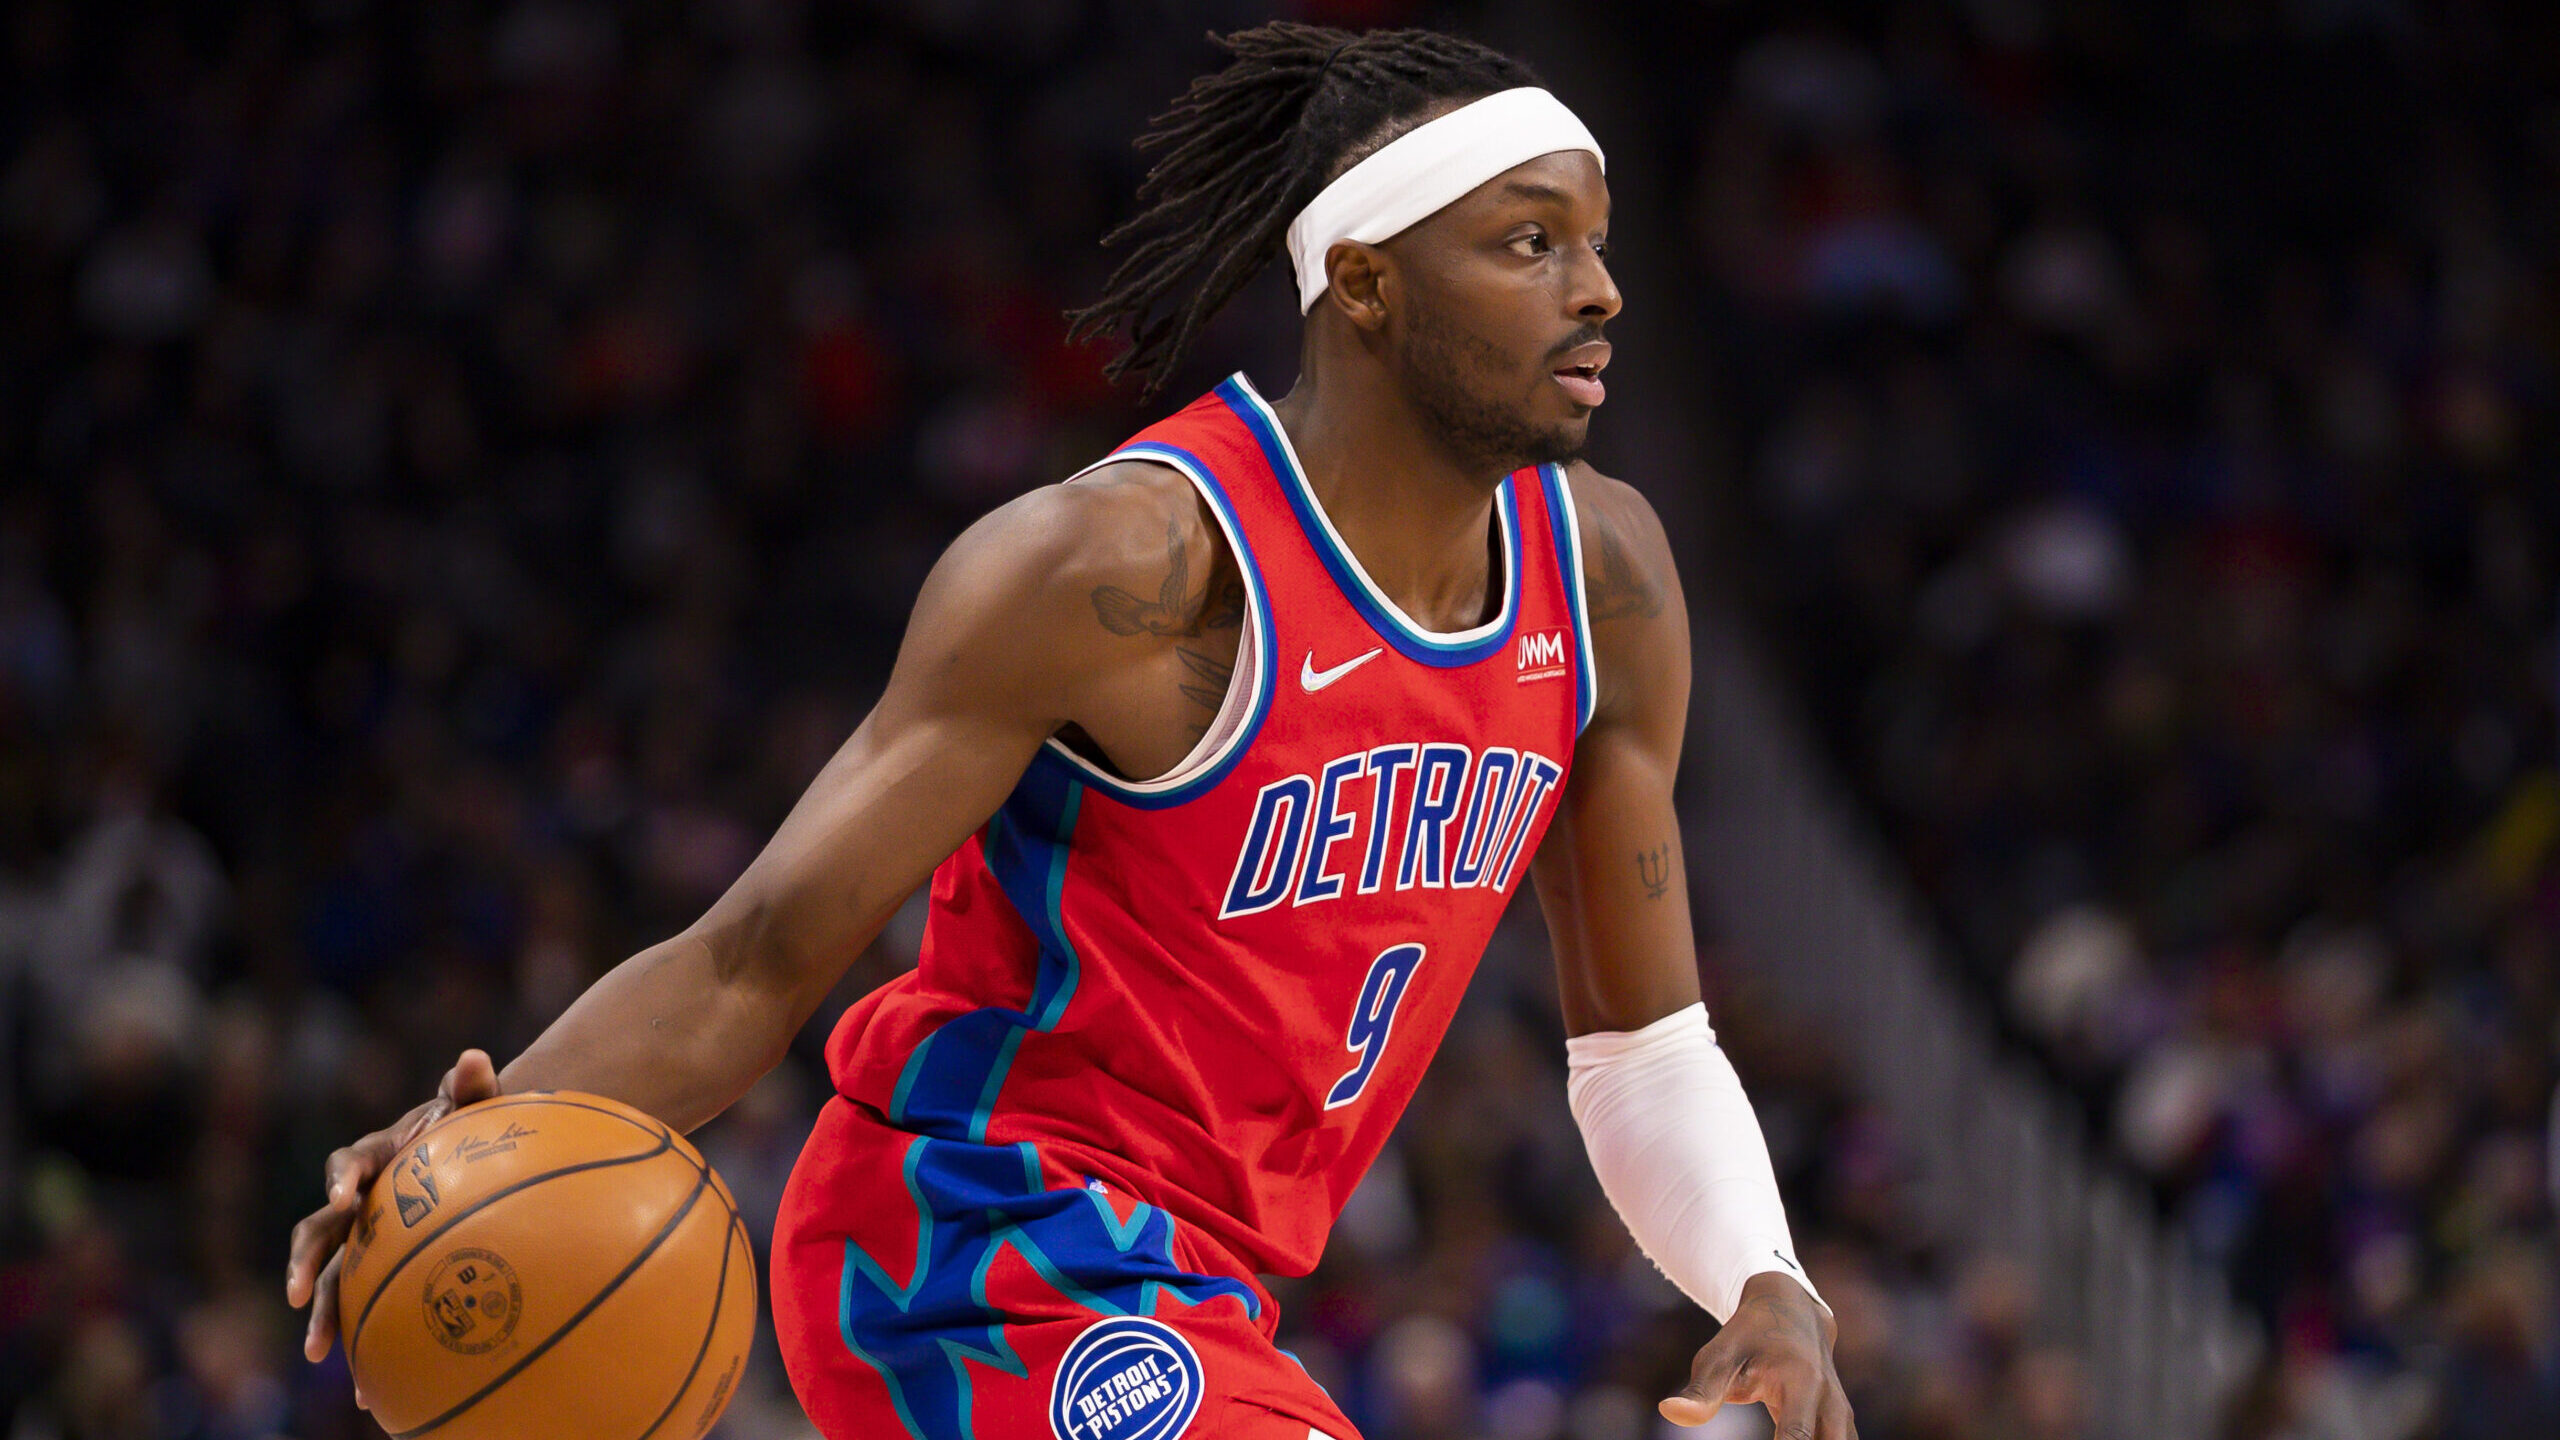 Pistons' Jerami Grant Will Miss Rest of the Season With Calf Injury